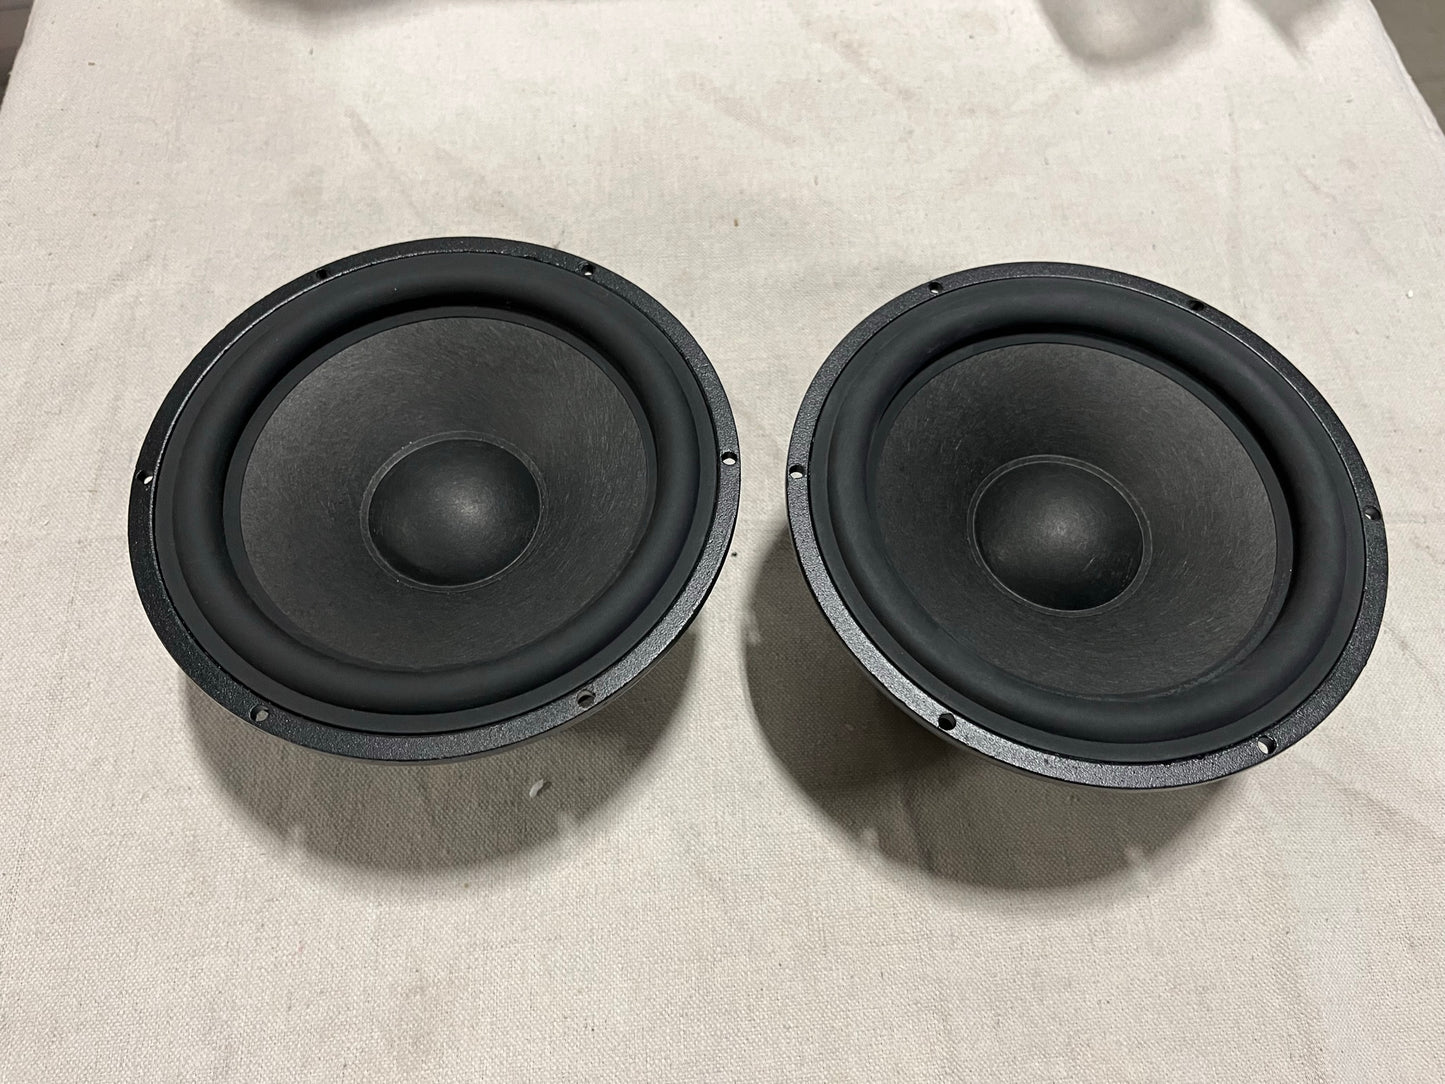 Silver Flute W17RC38-04 6.5" Woofer Wool Cone 4 ohm, NIOB, Two (2) Pairs for Sale. We Sell Professional Audio Equipment. Audio Systems, Amplifiers, Consoles, Mixers, Electronics, Entertainment, Live Sound.